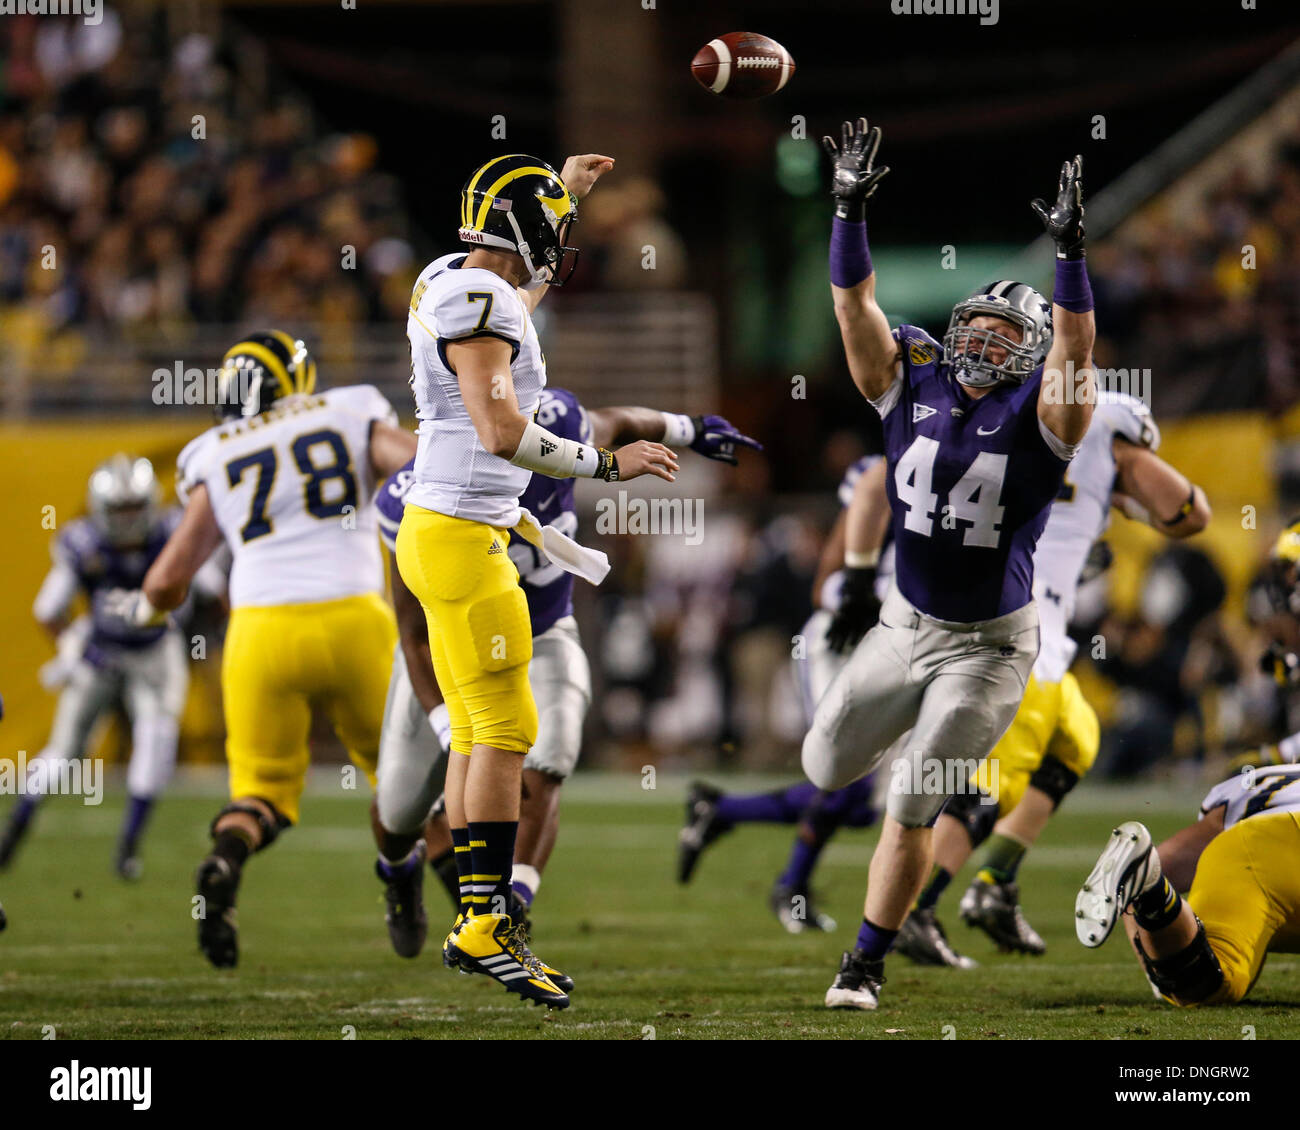 Tempe, Arizona, USA. 28th Dec, 2013. December 28, 2103: Michigan Wolverines quarterback Shane Morris (7) throws a pass with Kansas State Wildcats defensive end Ryan Mueller (44) applying pressure during the Buffalo Wild Wings Bowl NCAA football game between the Michigan Wolverines and the Kansas State Wildcats at Sun Devil Stadium in Tempe, AZ. Credit:  csm/Alamy Live News Stock Photo